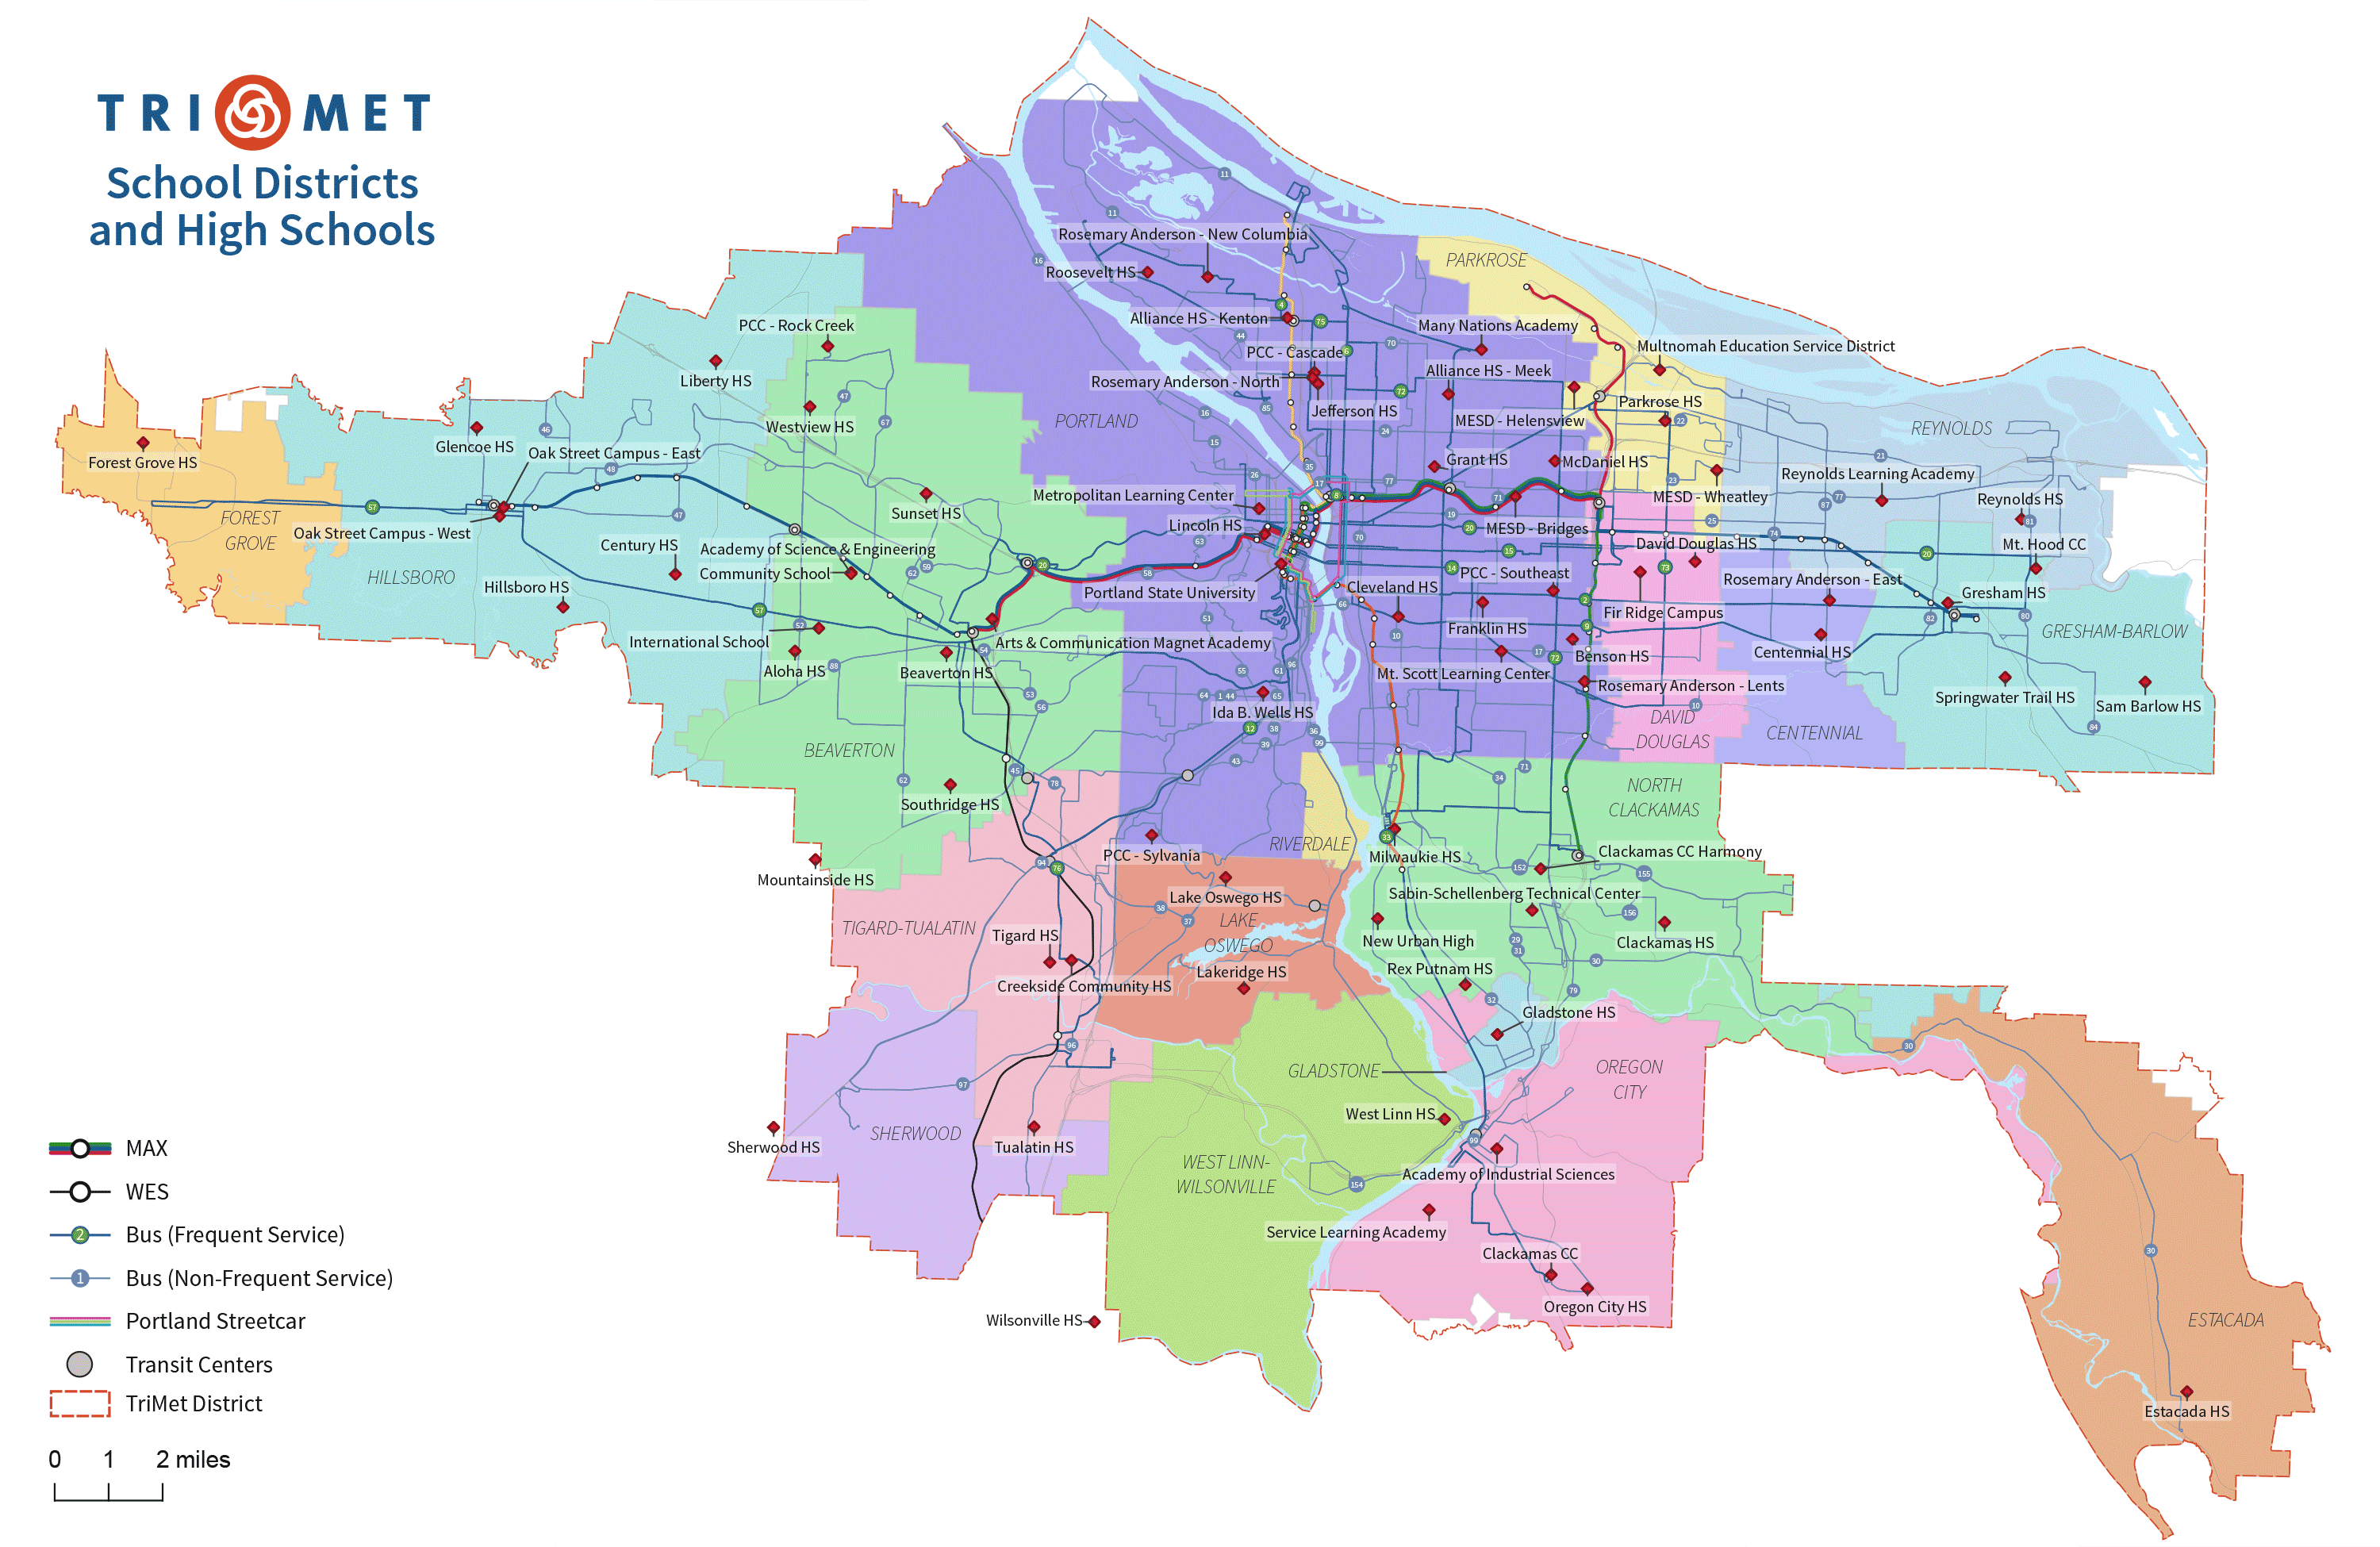 TriMet district map with school districts